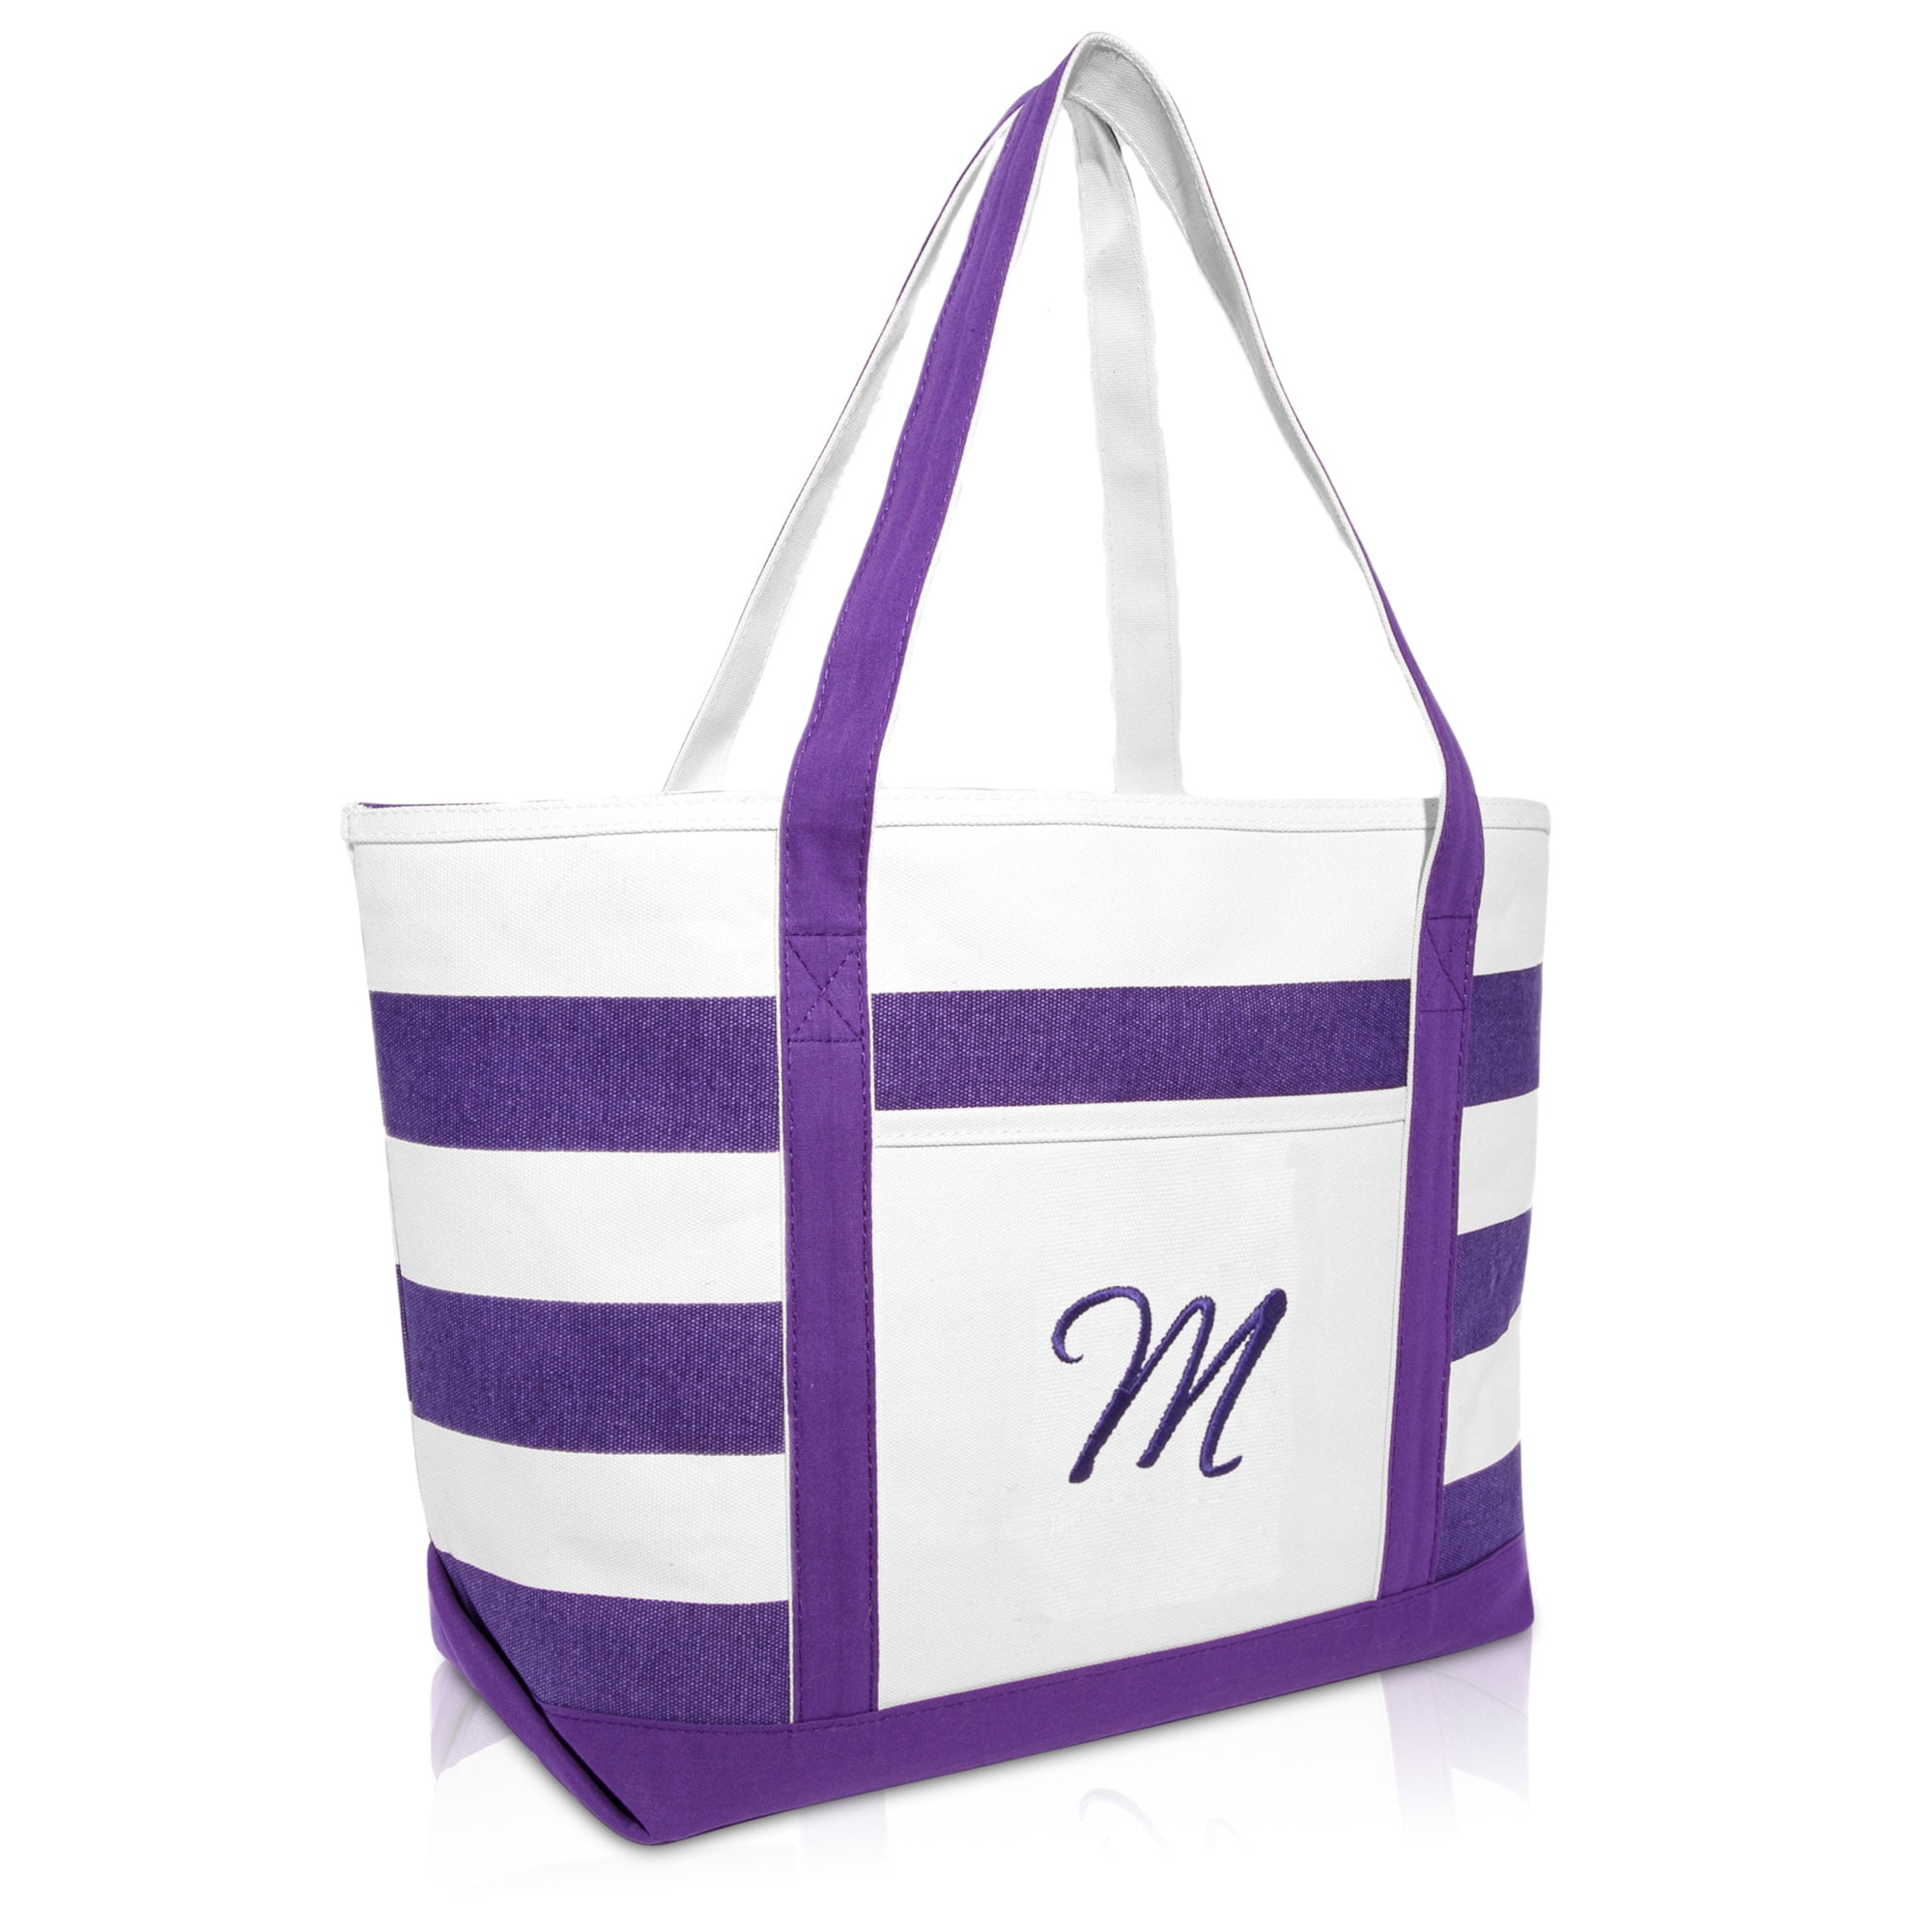 DALIX - DALIX Monogrammed Beach Bag and Totes for Women Personalized ...